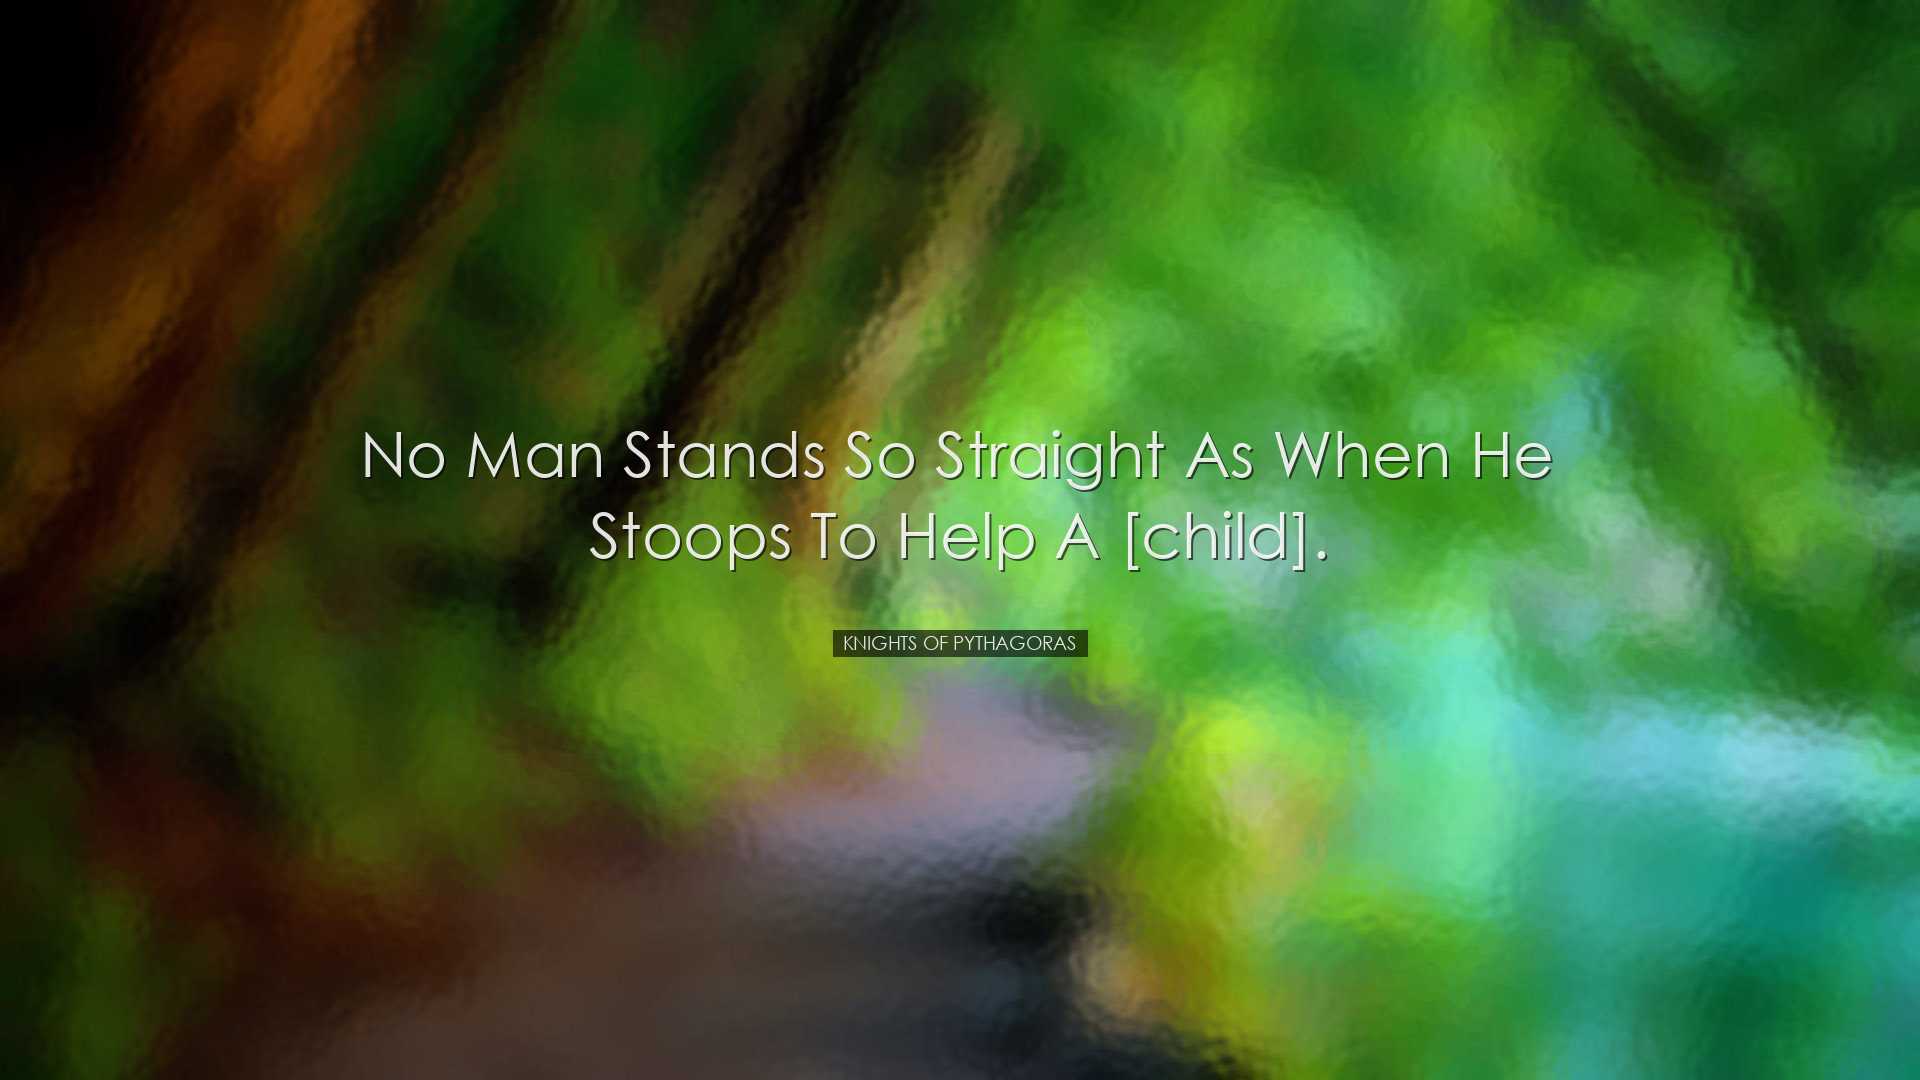 No man stands so straight as when he stoops to help a [child]. - K